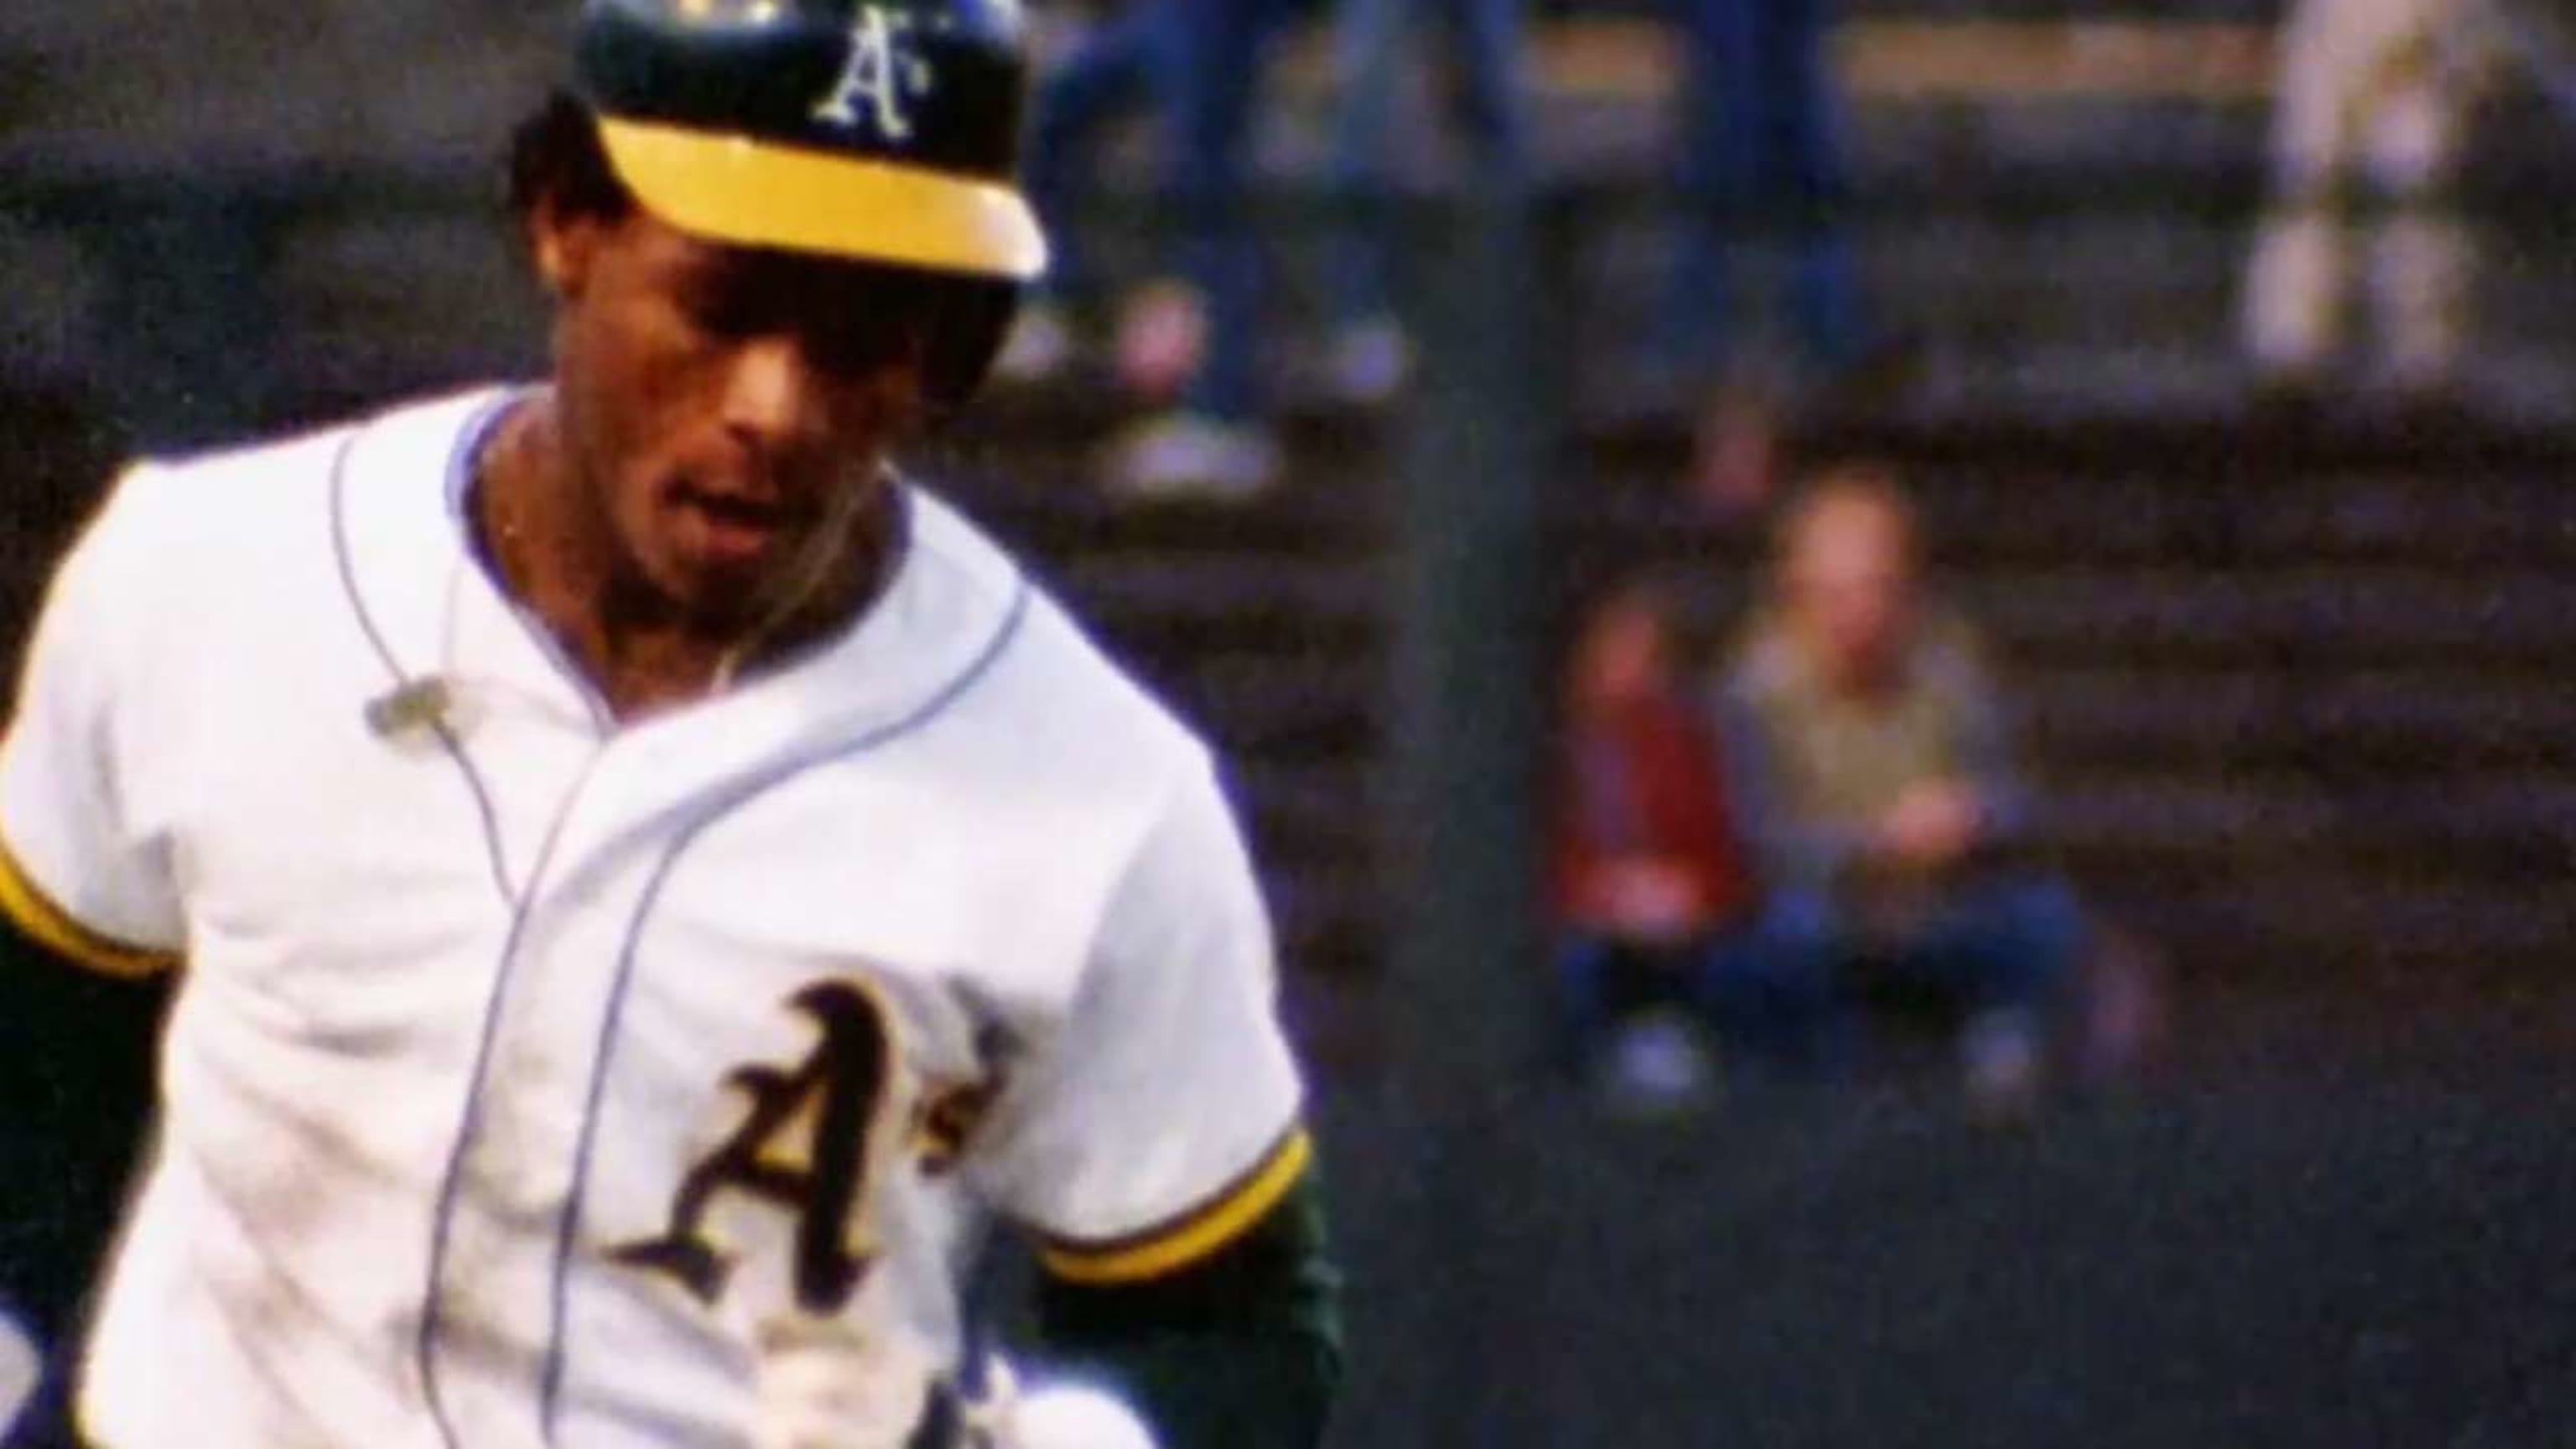 Rickey' excerpt: Looking back at Rickey Henderson's Oakland roots